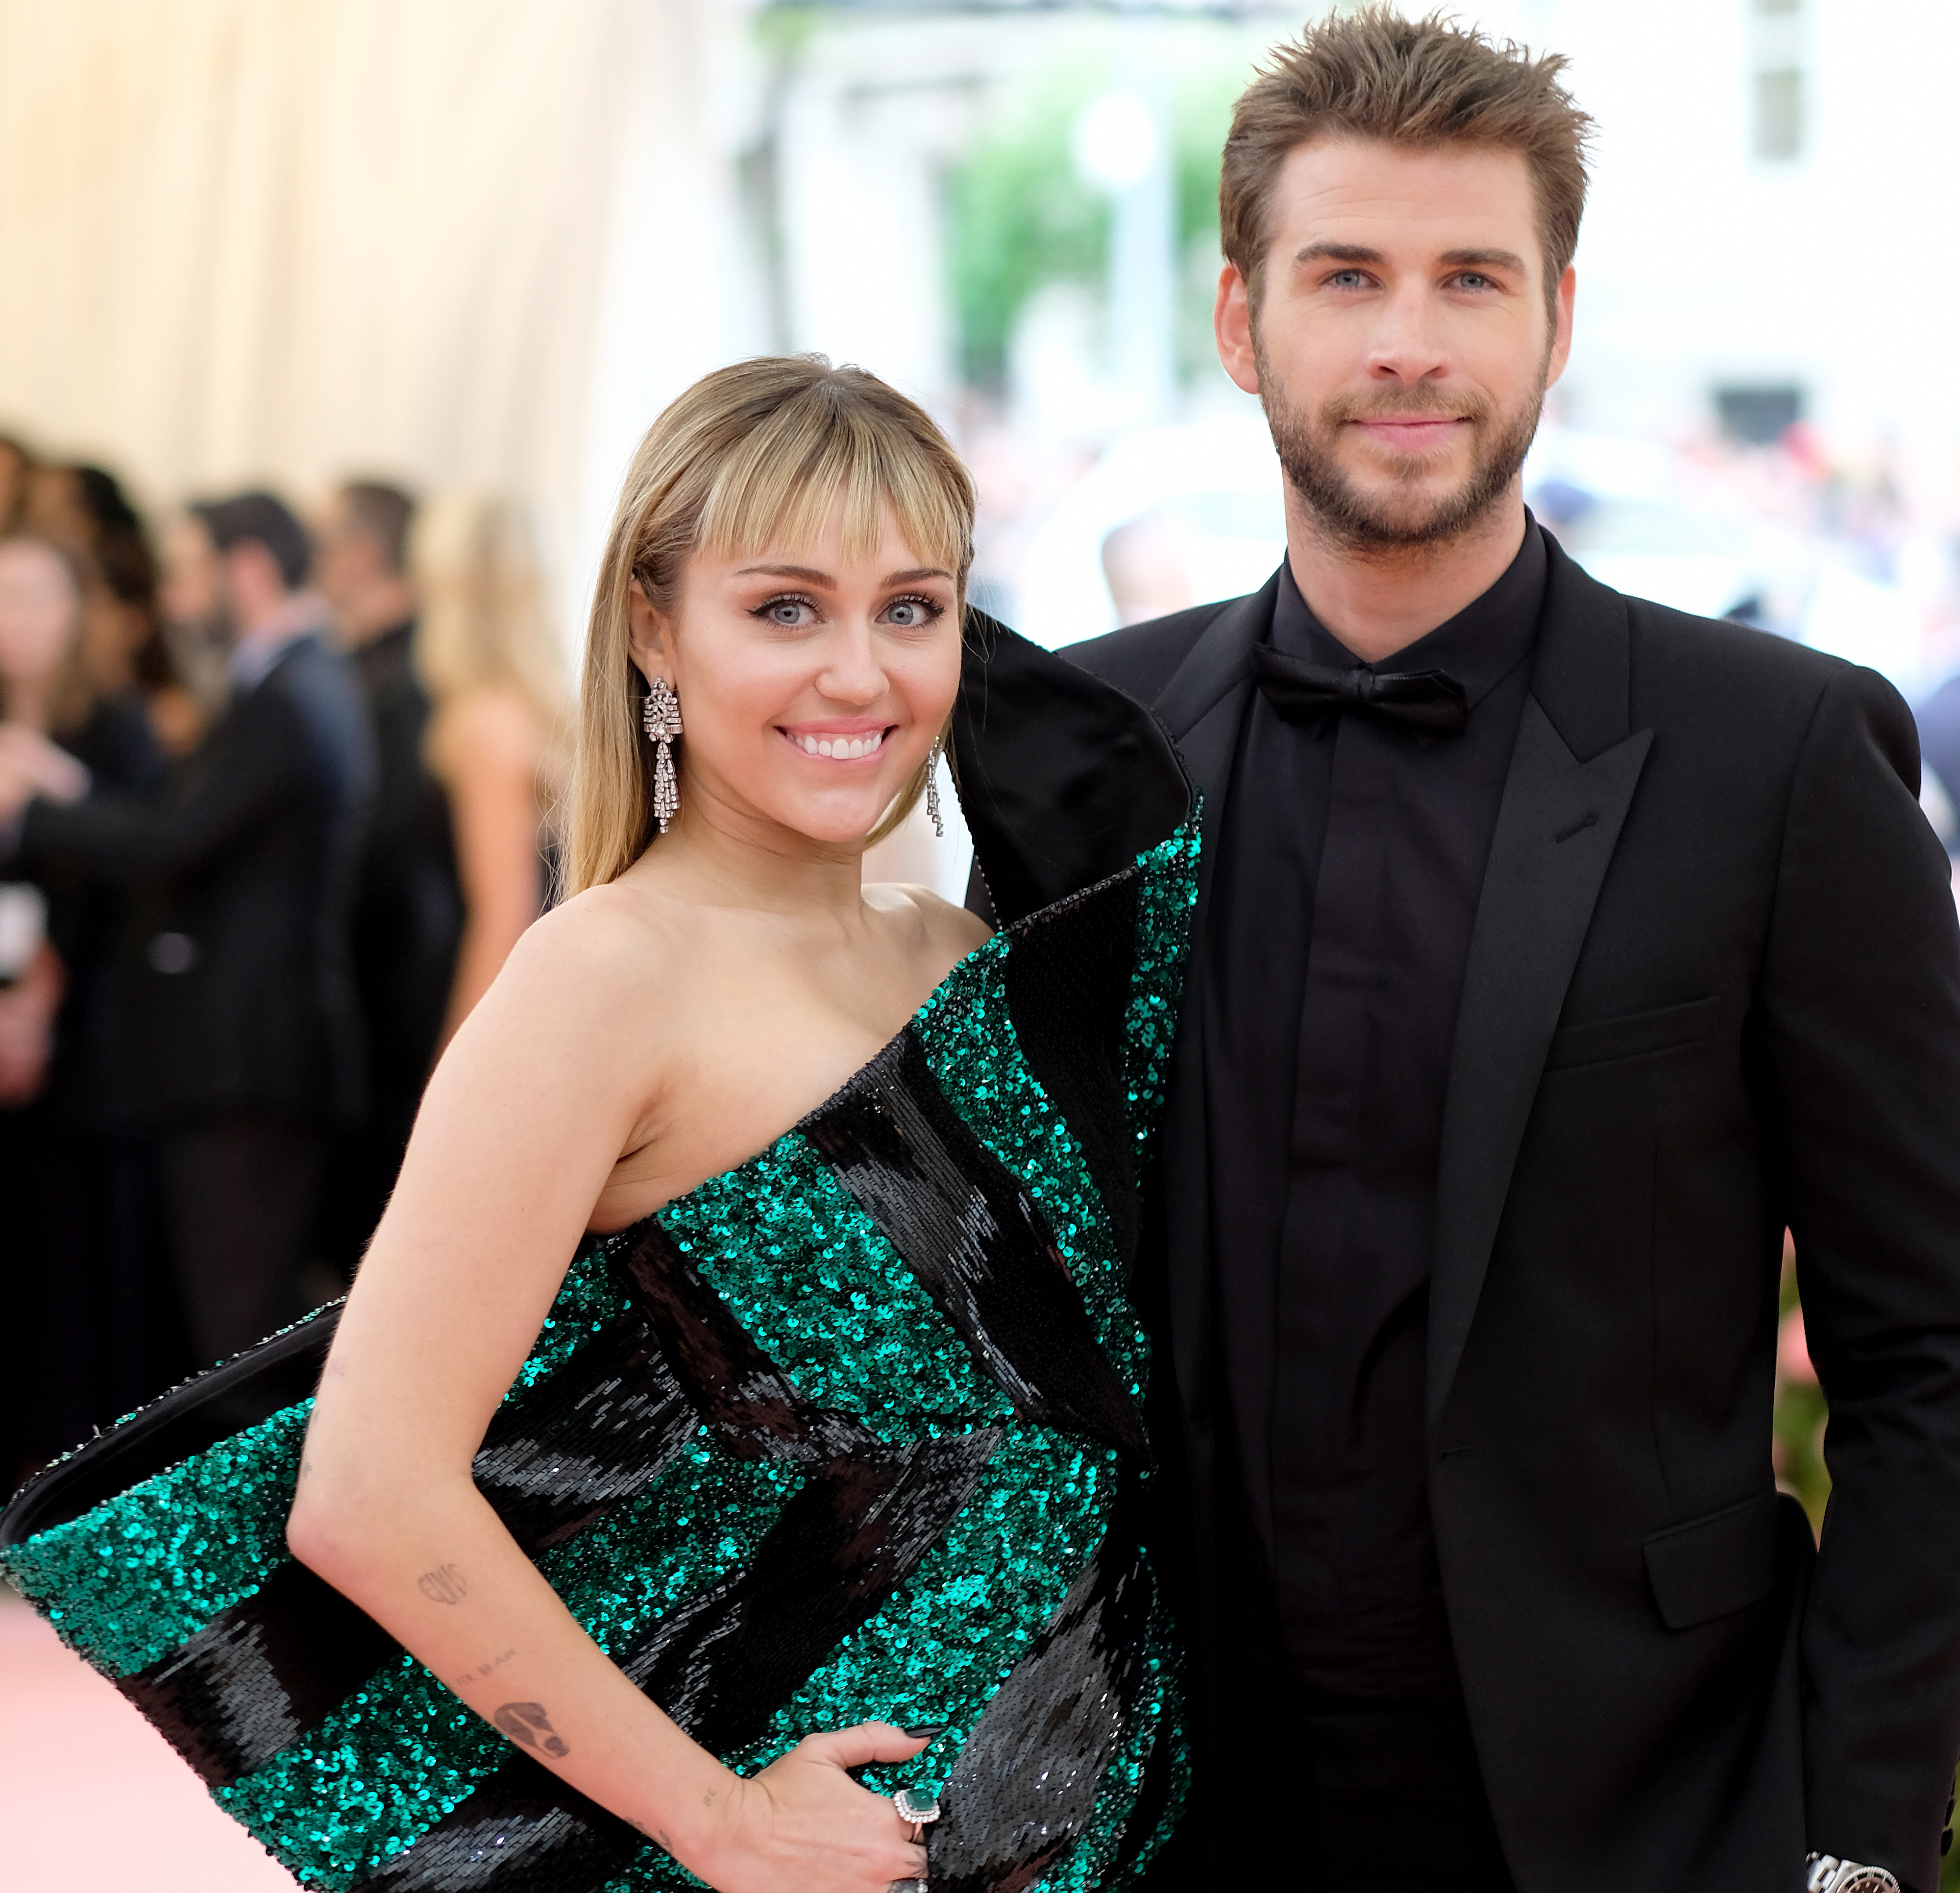 Miley Cyrus and Liam Hemsworth at Metropolitan Museum of Art on May 6, 2019, in New York City. | Source: Getty Images